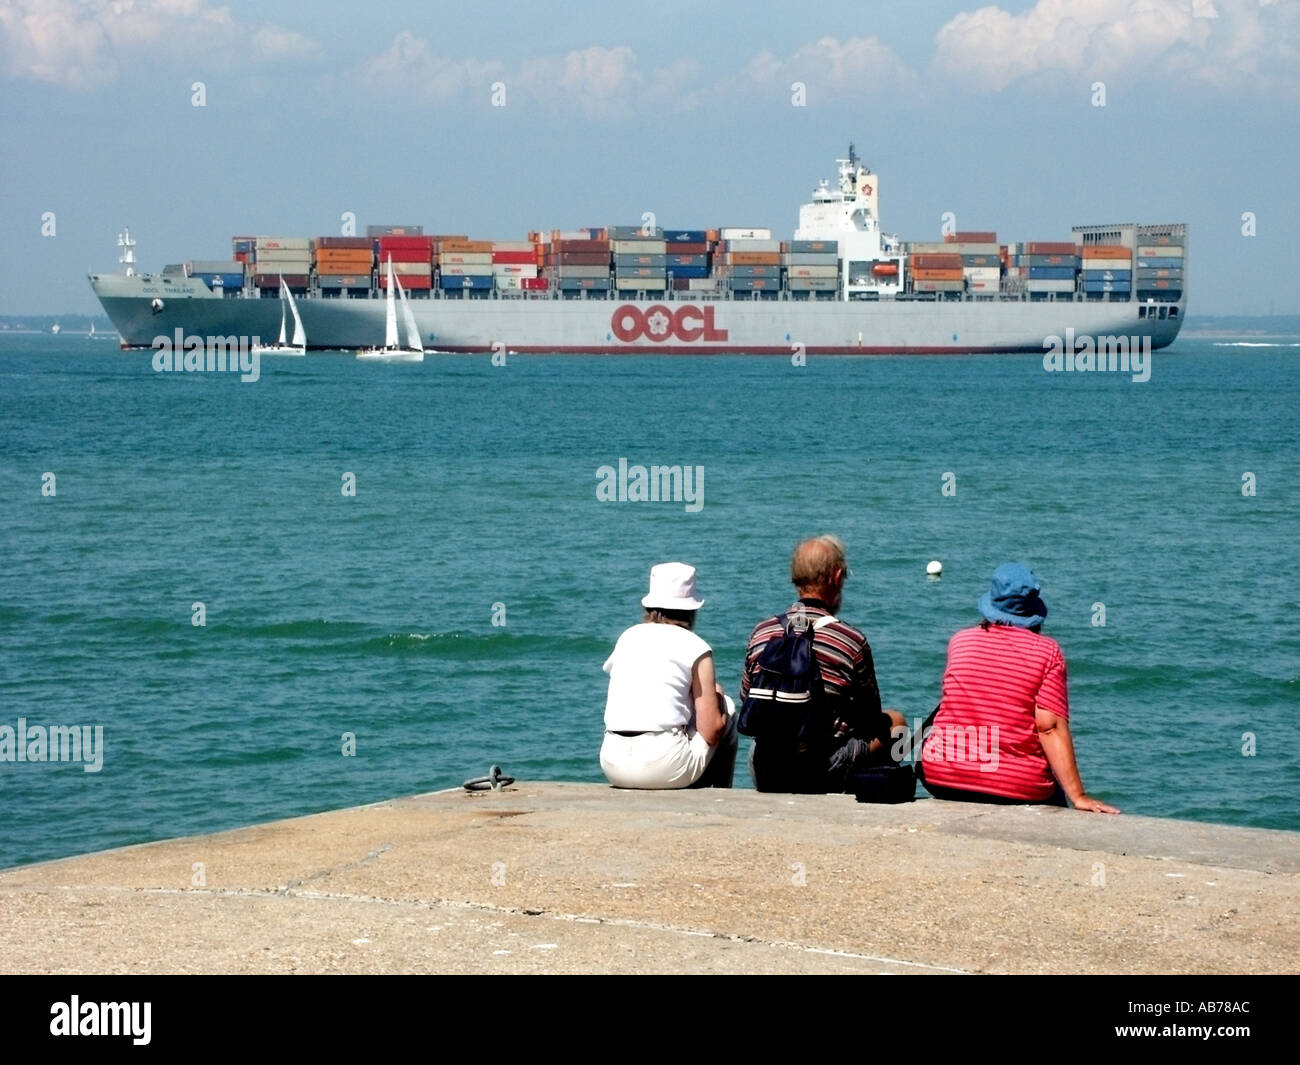 West Cowes Isle of Wight nave portacontainer OOCL nel Solent e spettatori Foto Stock